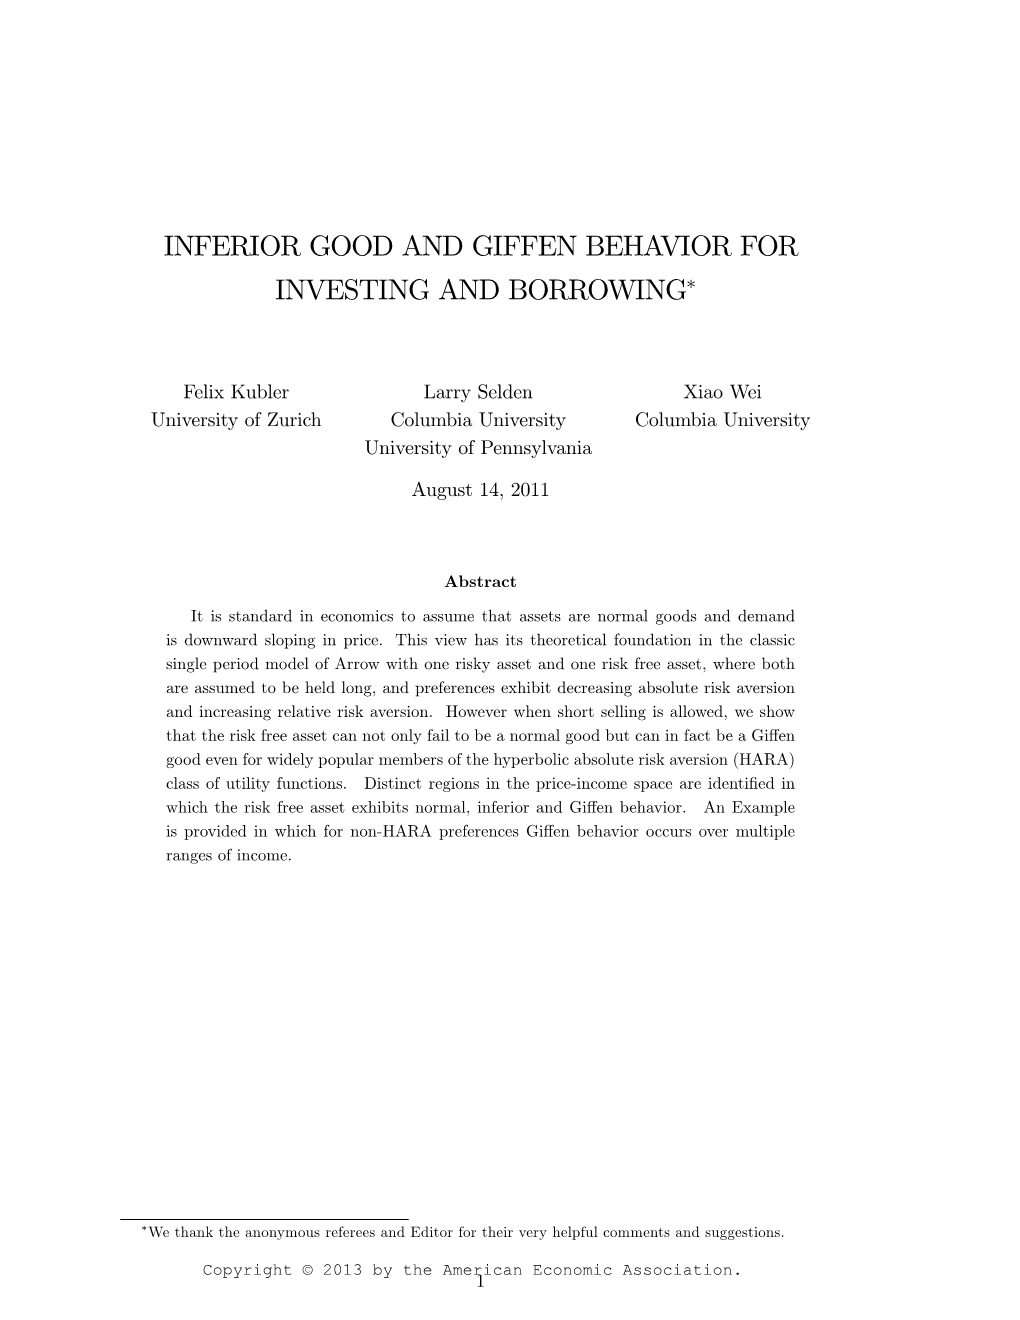 Inferior Good and Giffen Behavior for Investing and Borrowing∗